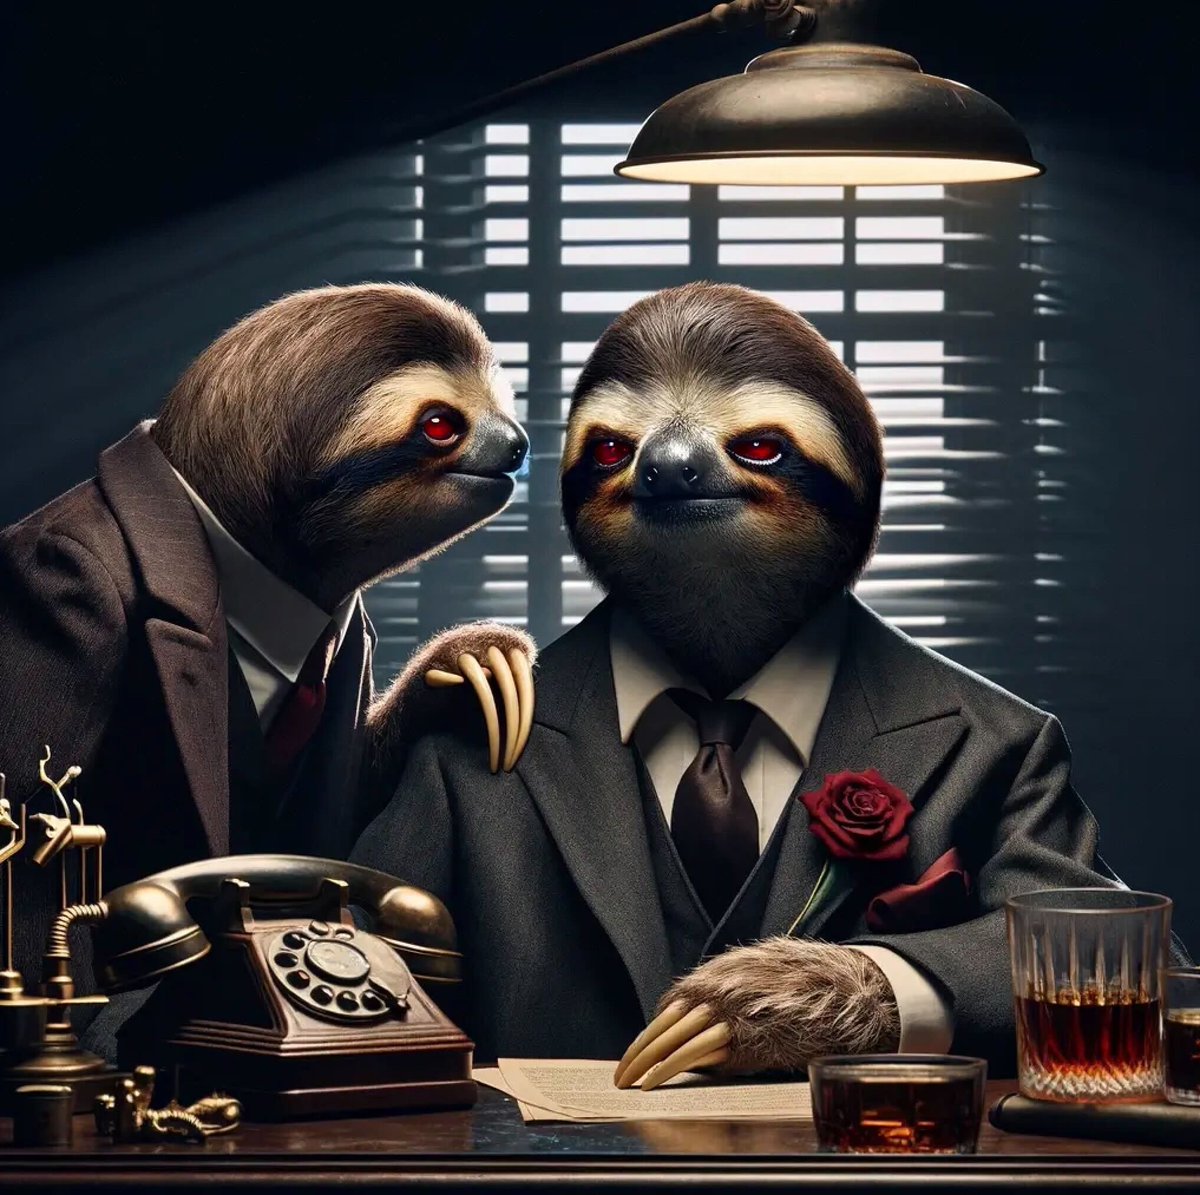 🎩🌿🦥 I'm going to make them a memecoin they can't refuse🚀 Slothana's making moves to dominate the crypto scene. 'Keep your friends close and your memecoins closer' - The Slothfather 💼💰 #Slothana #SlothFather